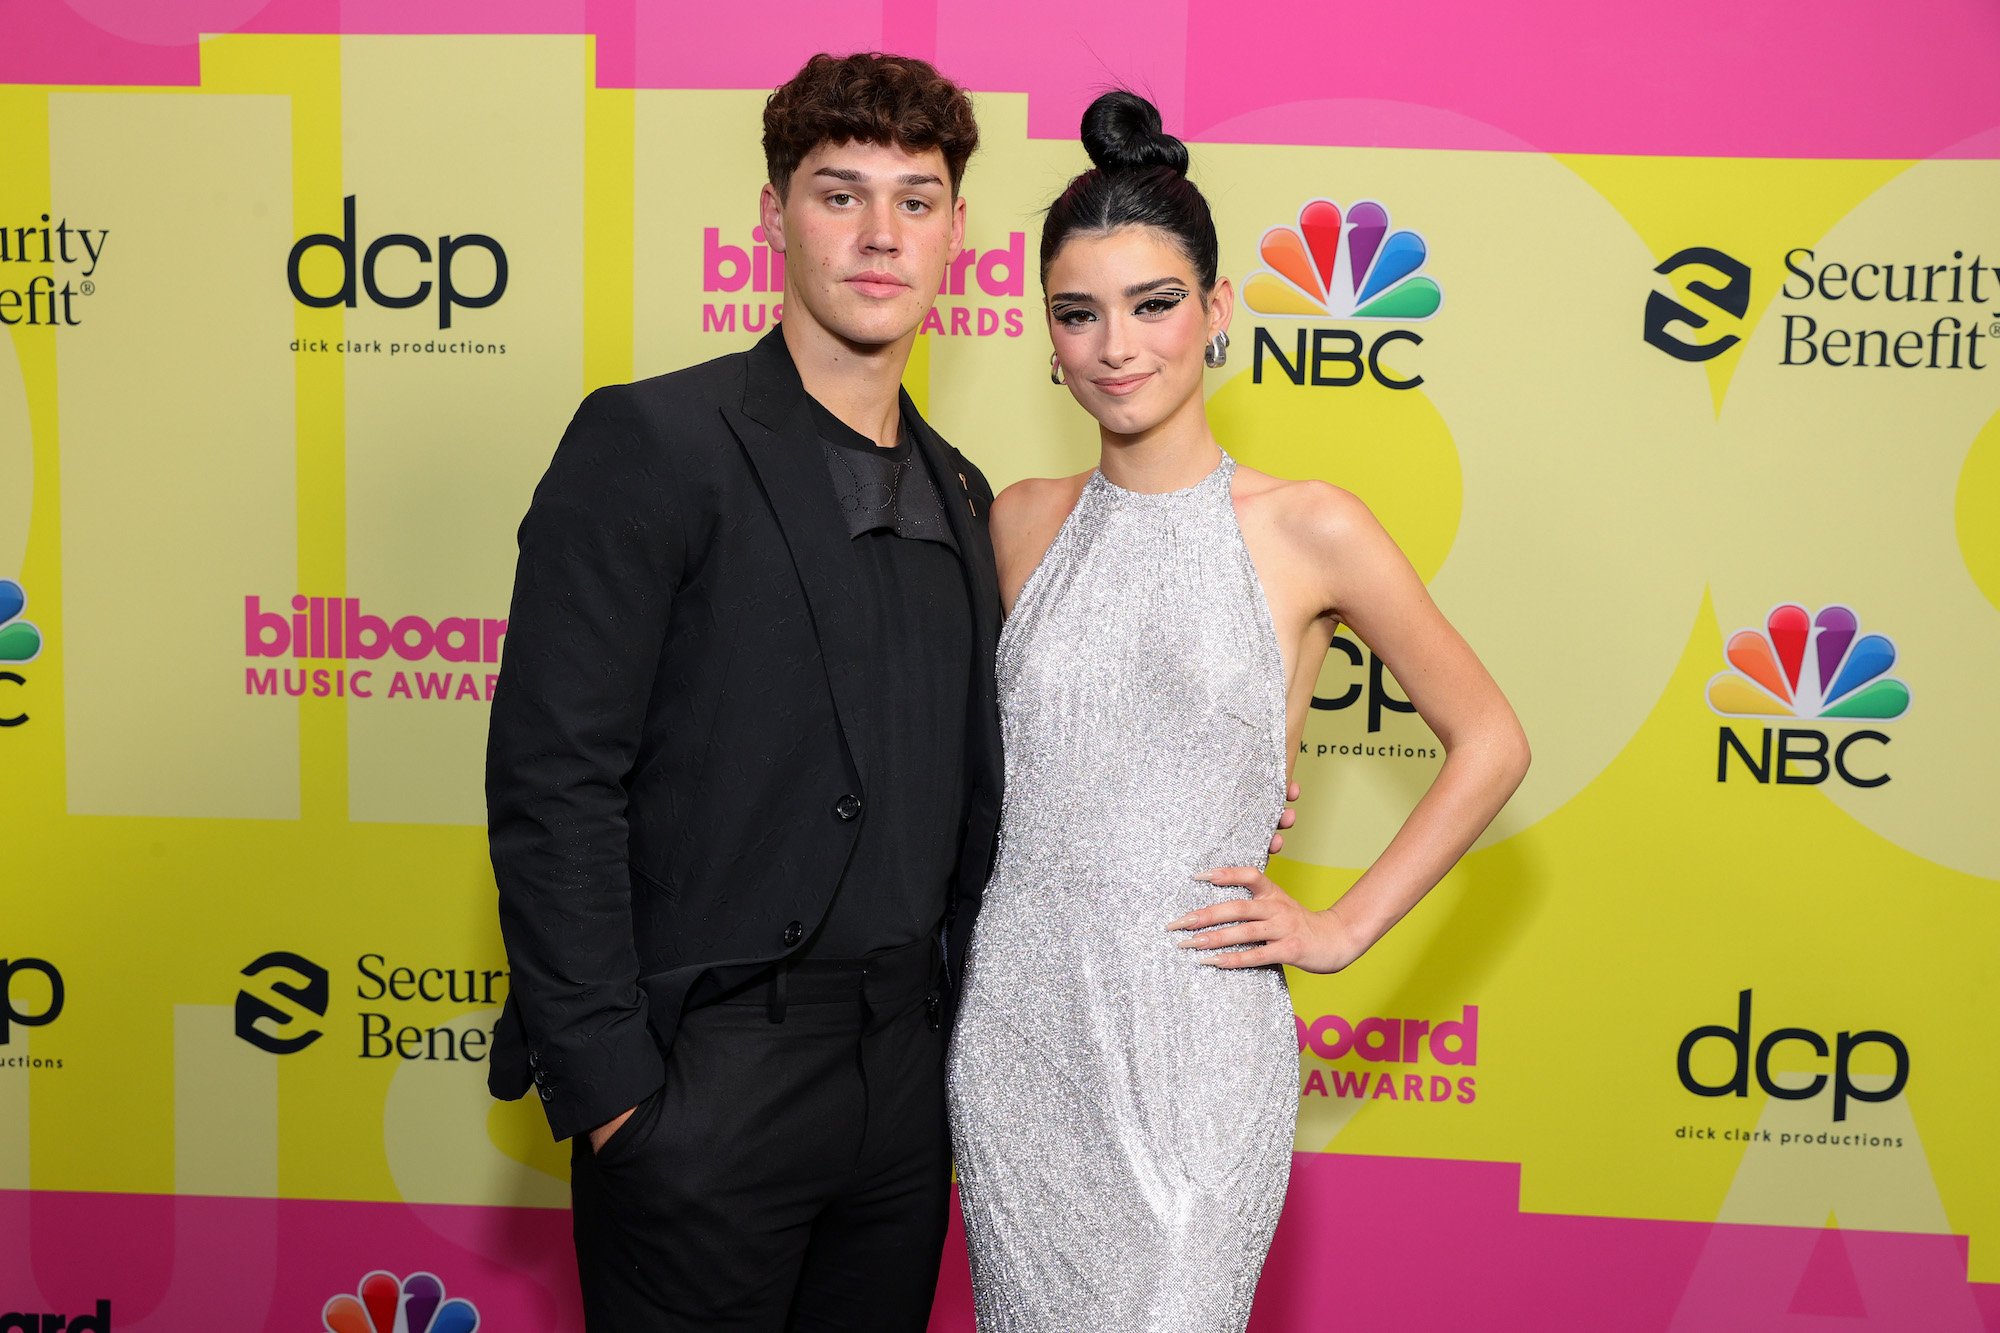 Noah Beck and Dixie D'Amelio posing on the red carpet at the 2021 Billboard Music Awards